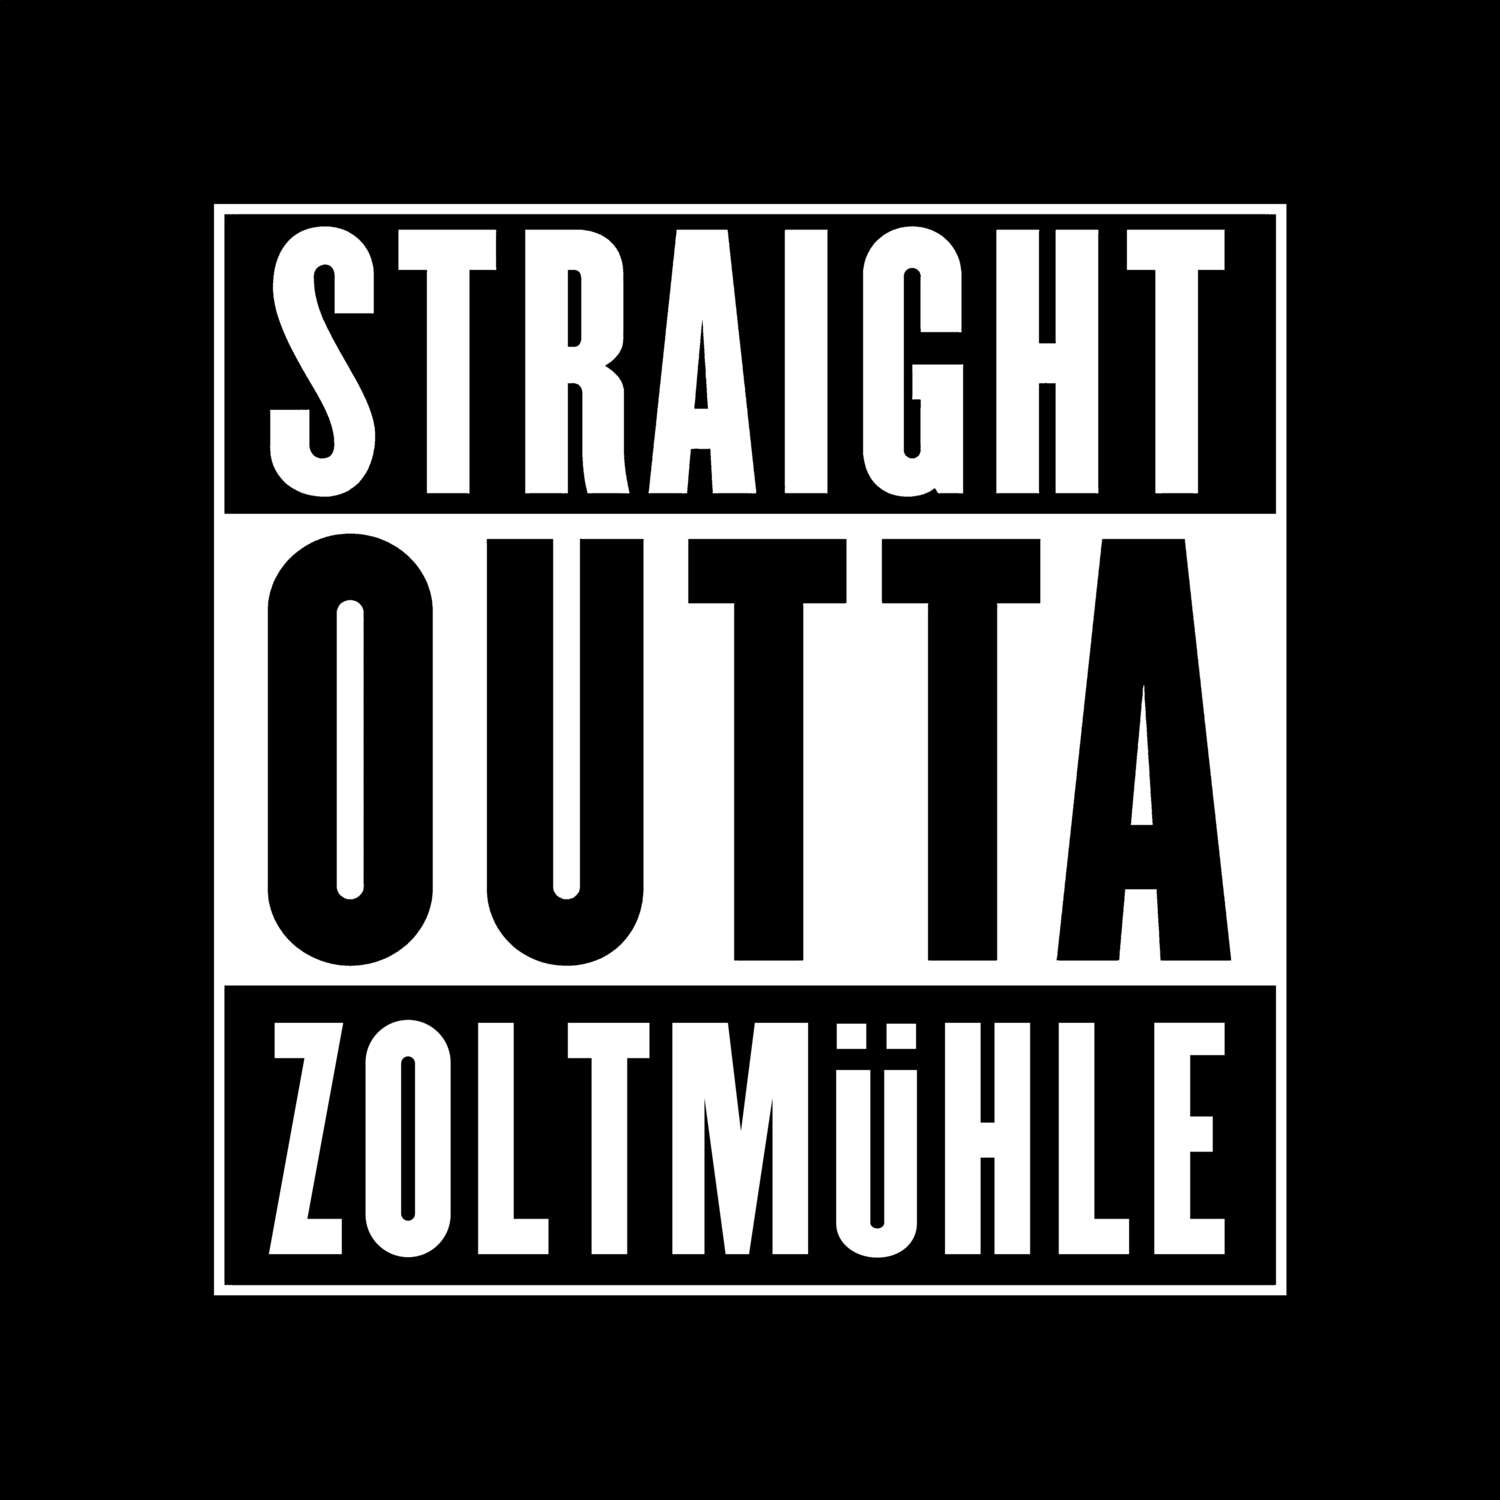 Zoltmühle T-Shirt »Straight Outta«